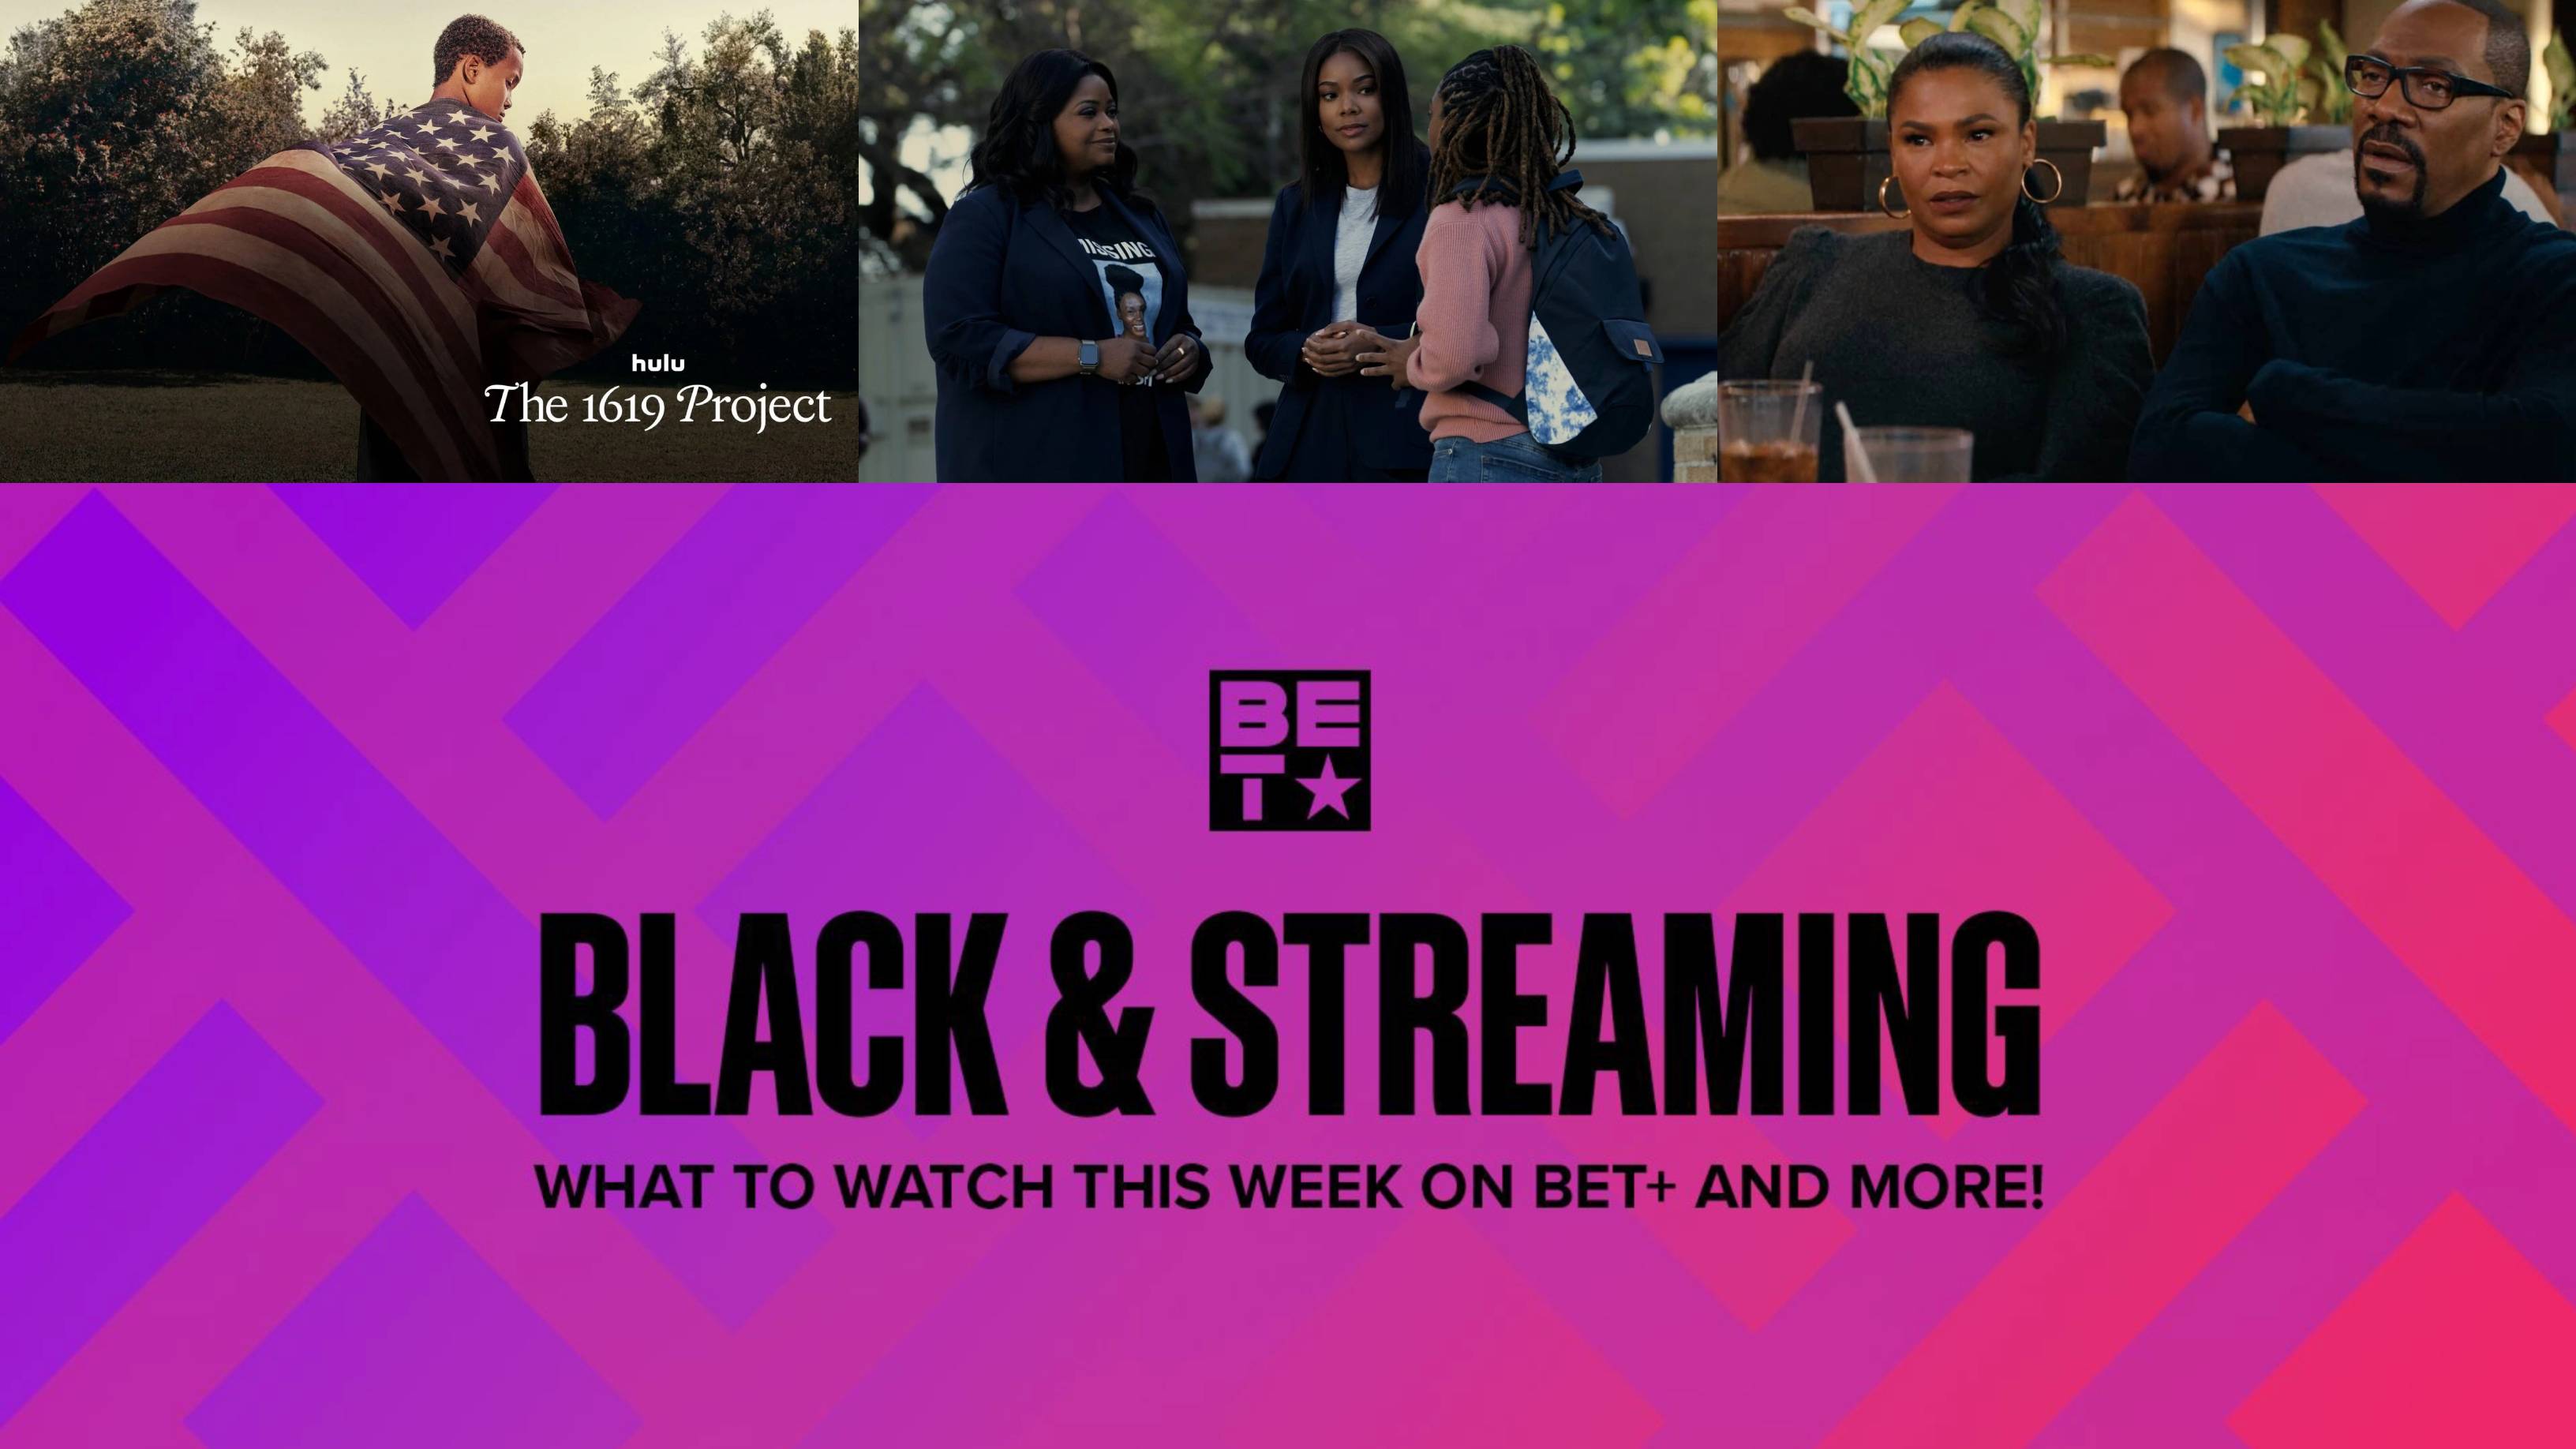 Black And Streaming Vol 3. What Watch This Week On BET+ And More